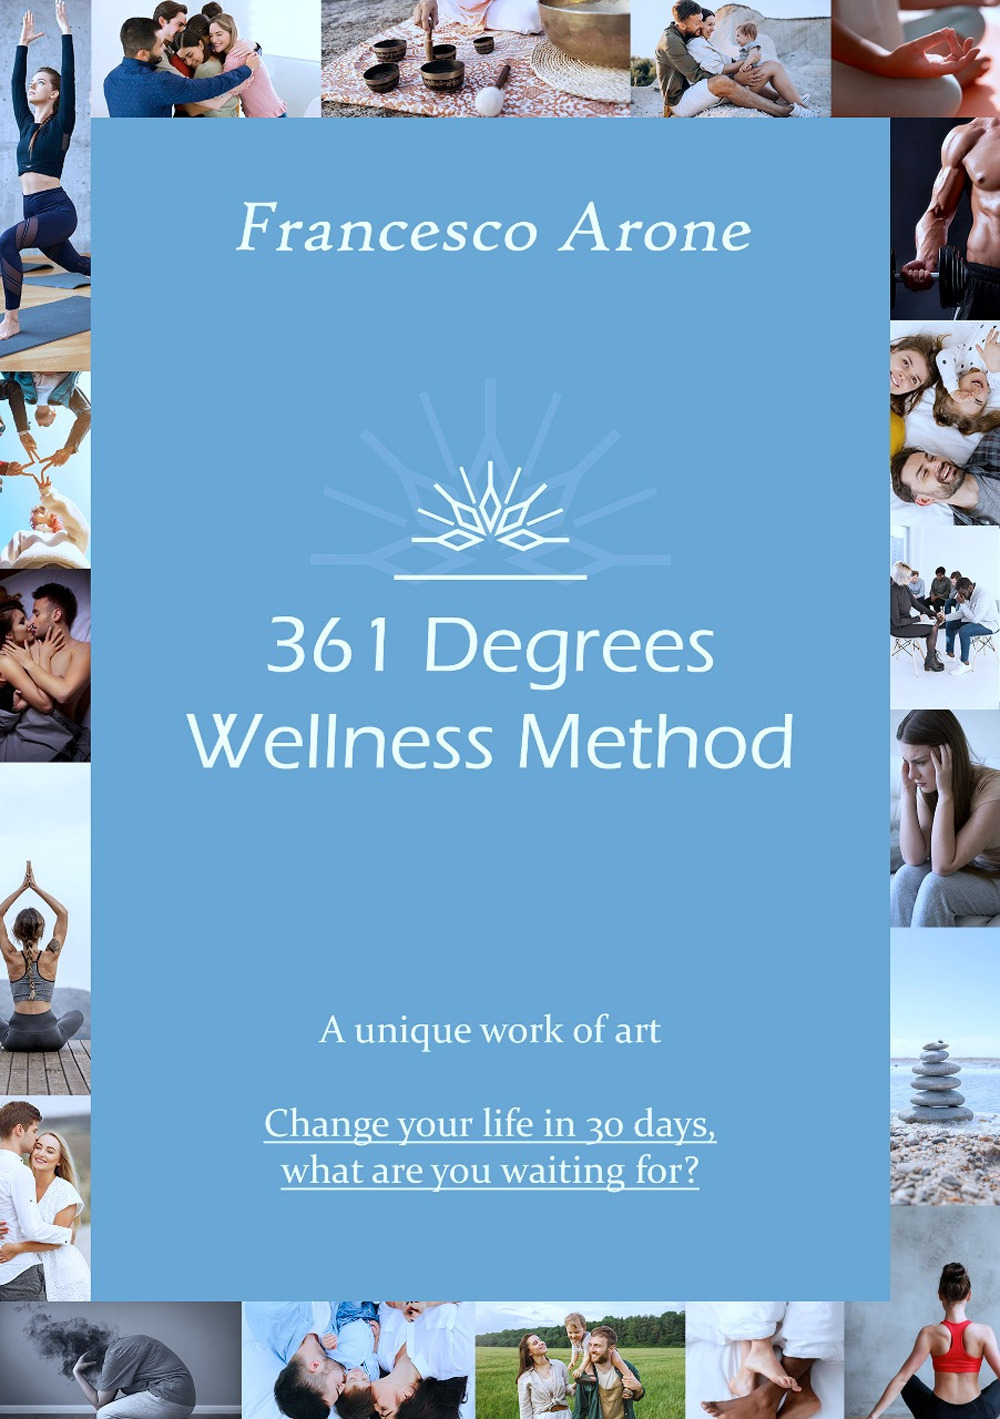 361 Degrees Wellness Method. A unique work of art. Change your life in 30 days, what are you waiting for?